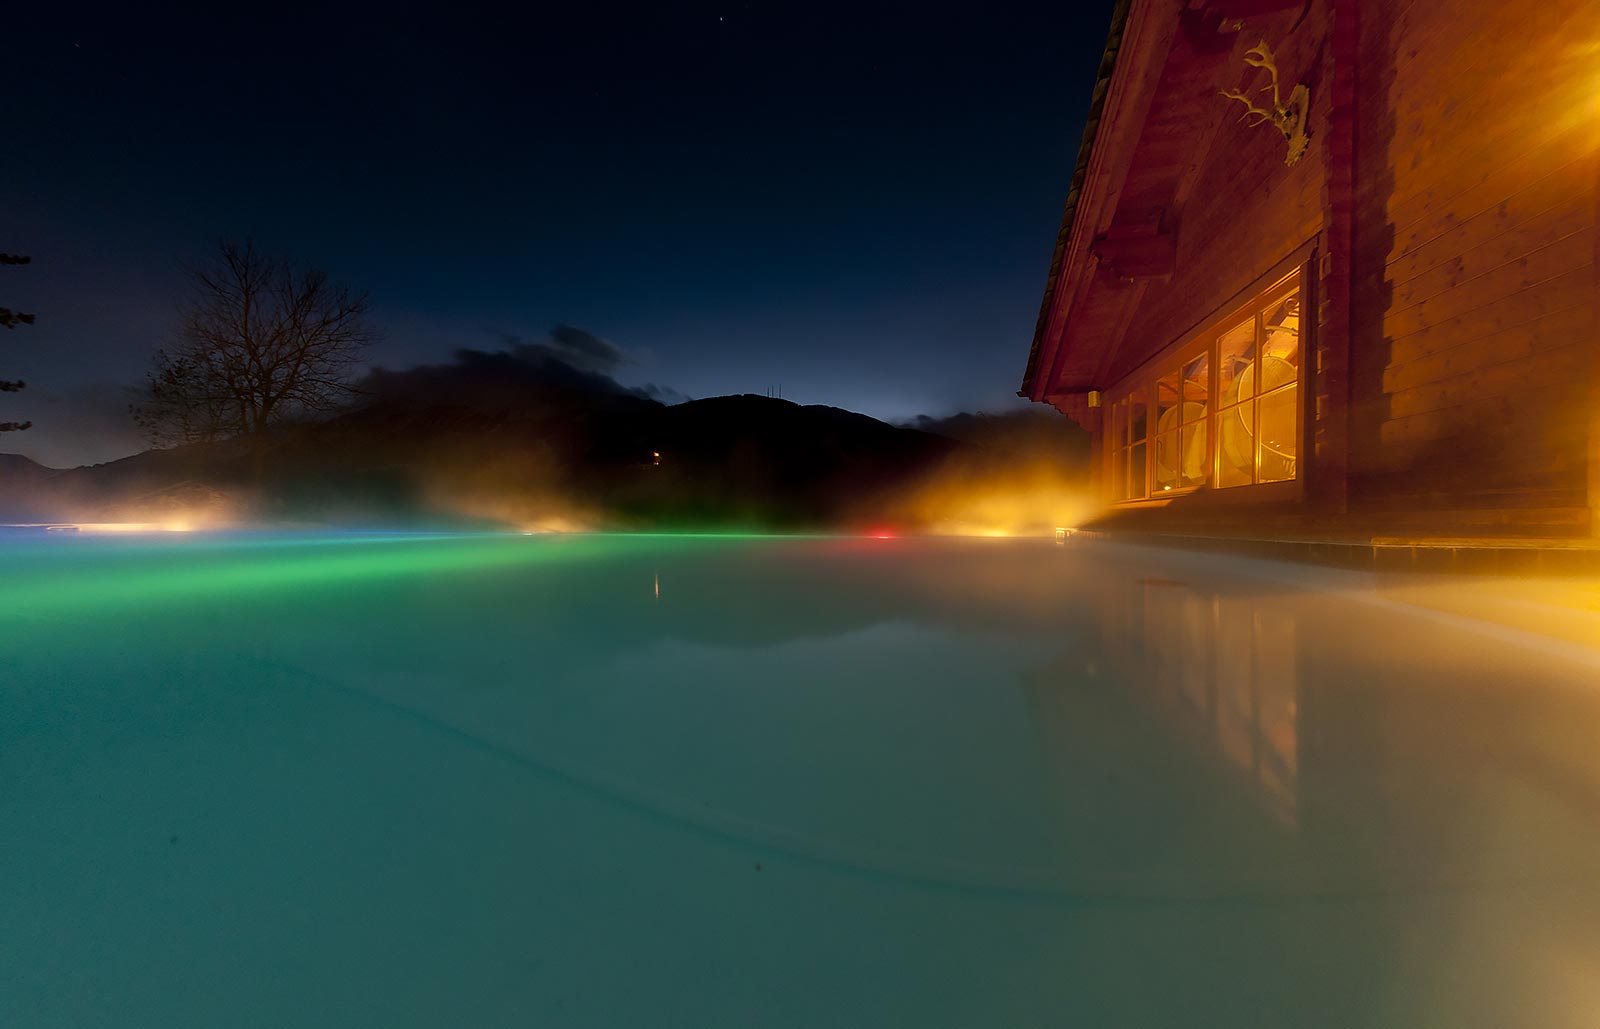 Hot water tub with lights on the outside of a wooden alpine house